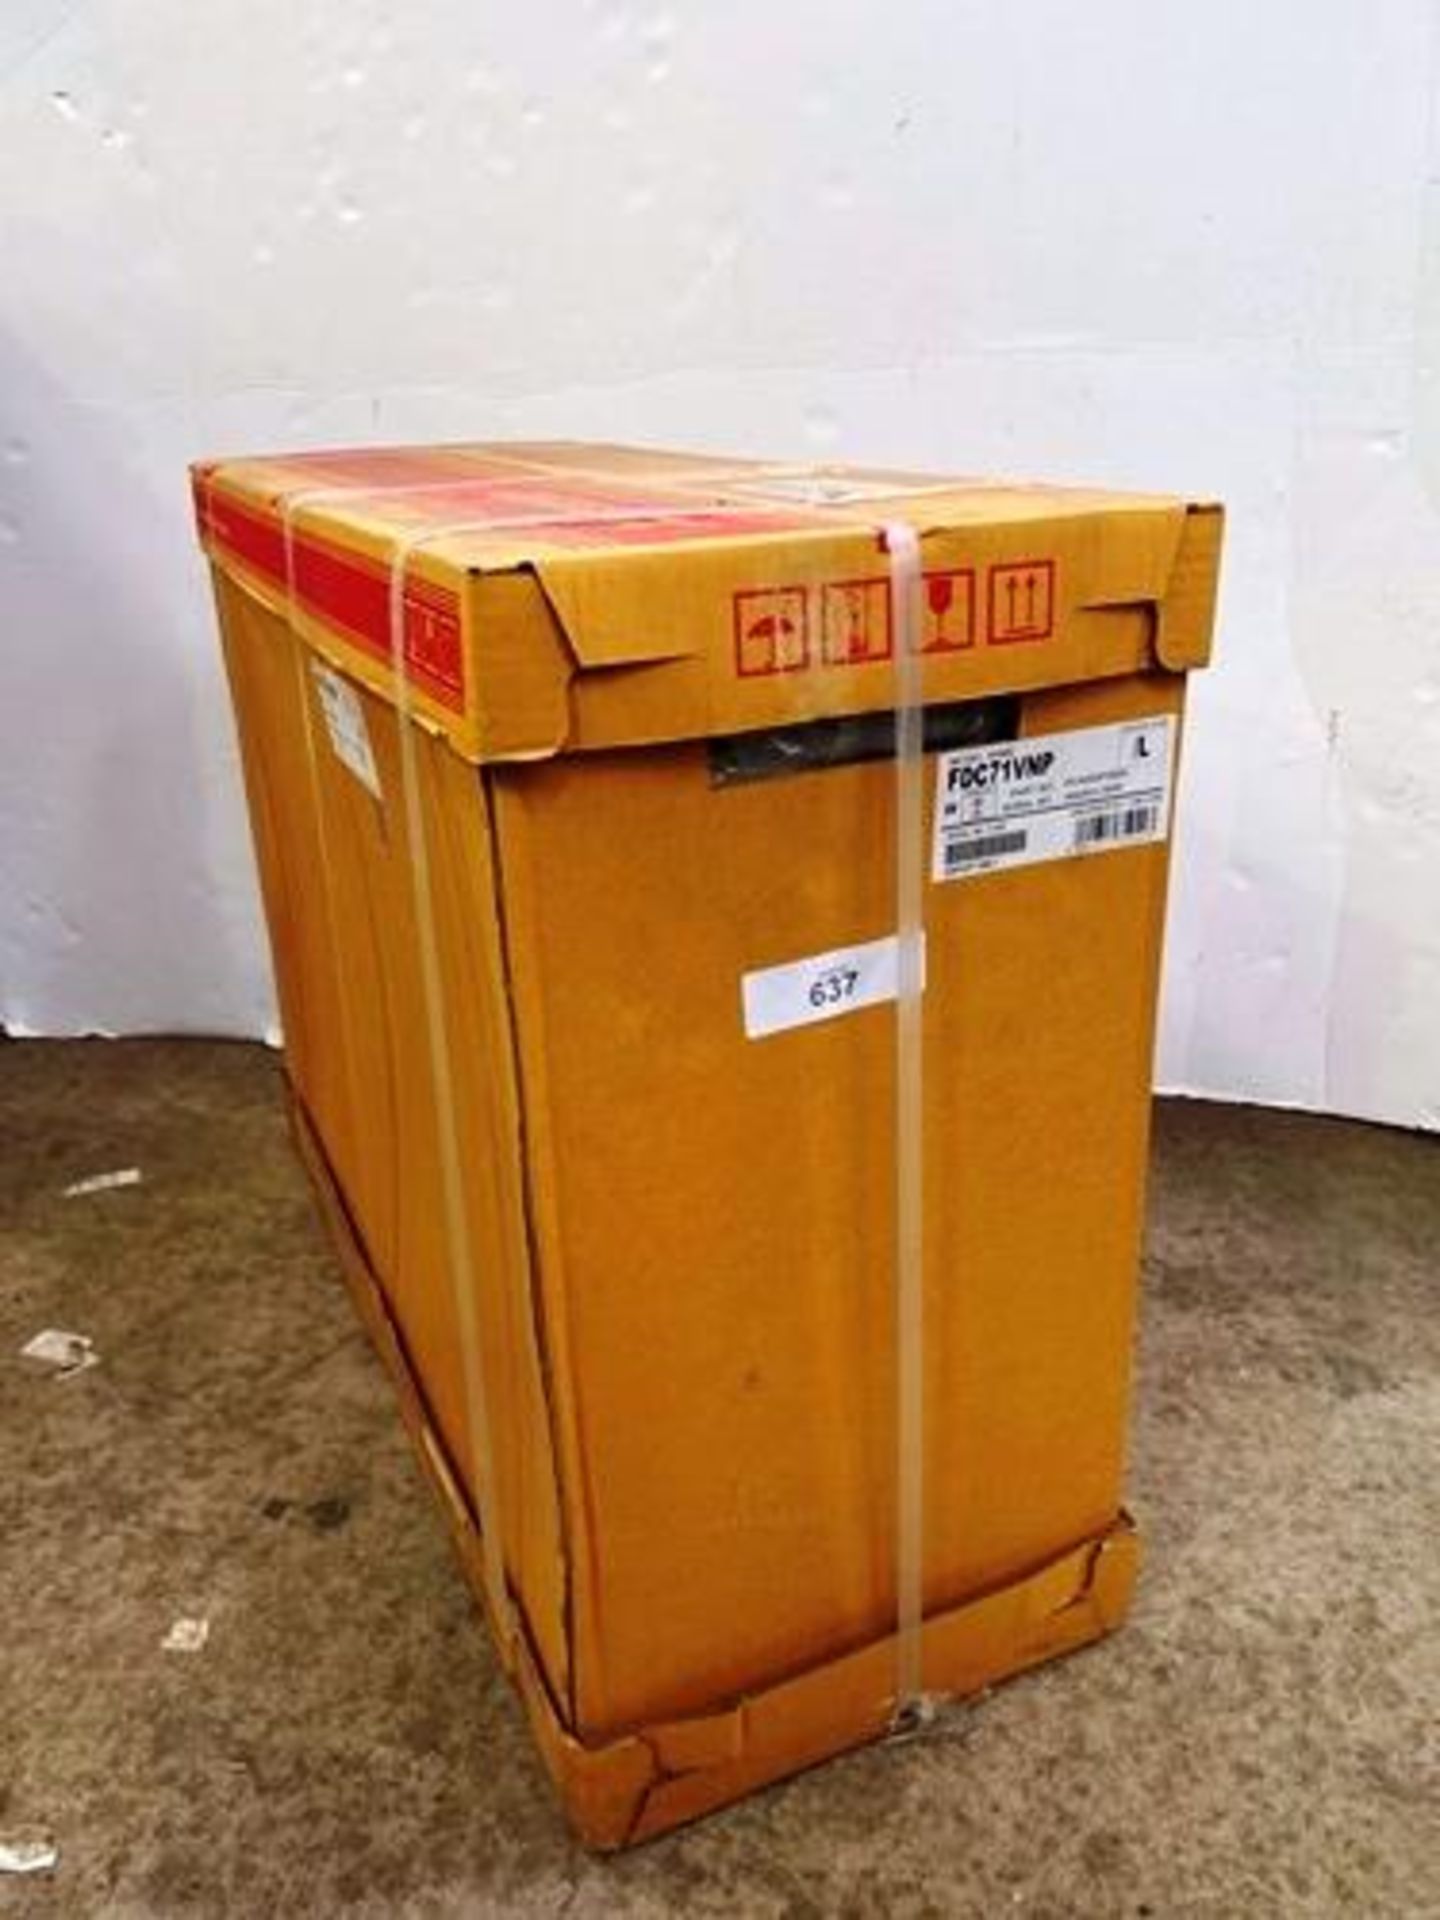 1 x Mitsubishi heavy industries air conditioner, model FDC71VNP - Sealed new in box (GS40C)